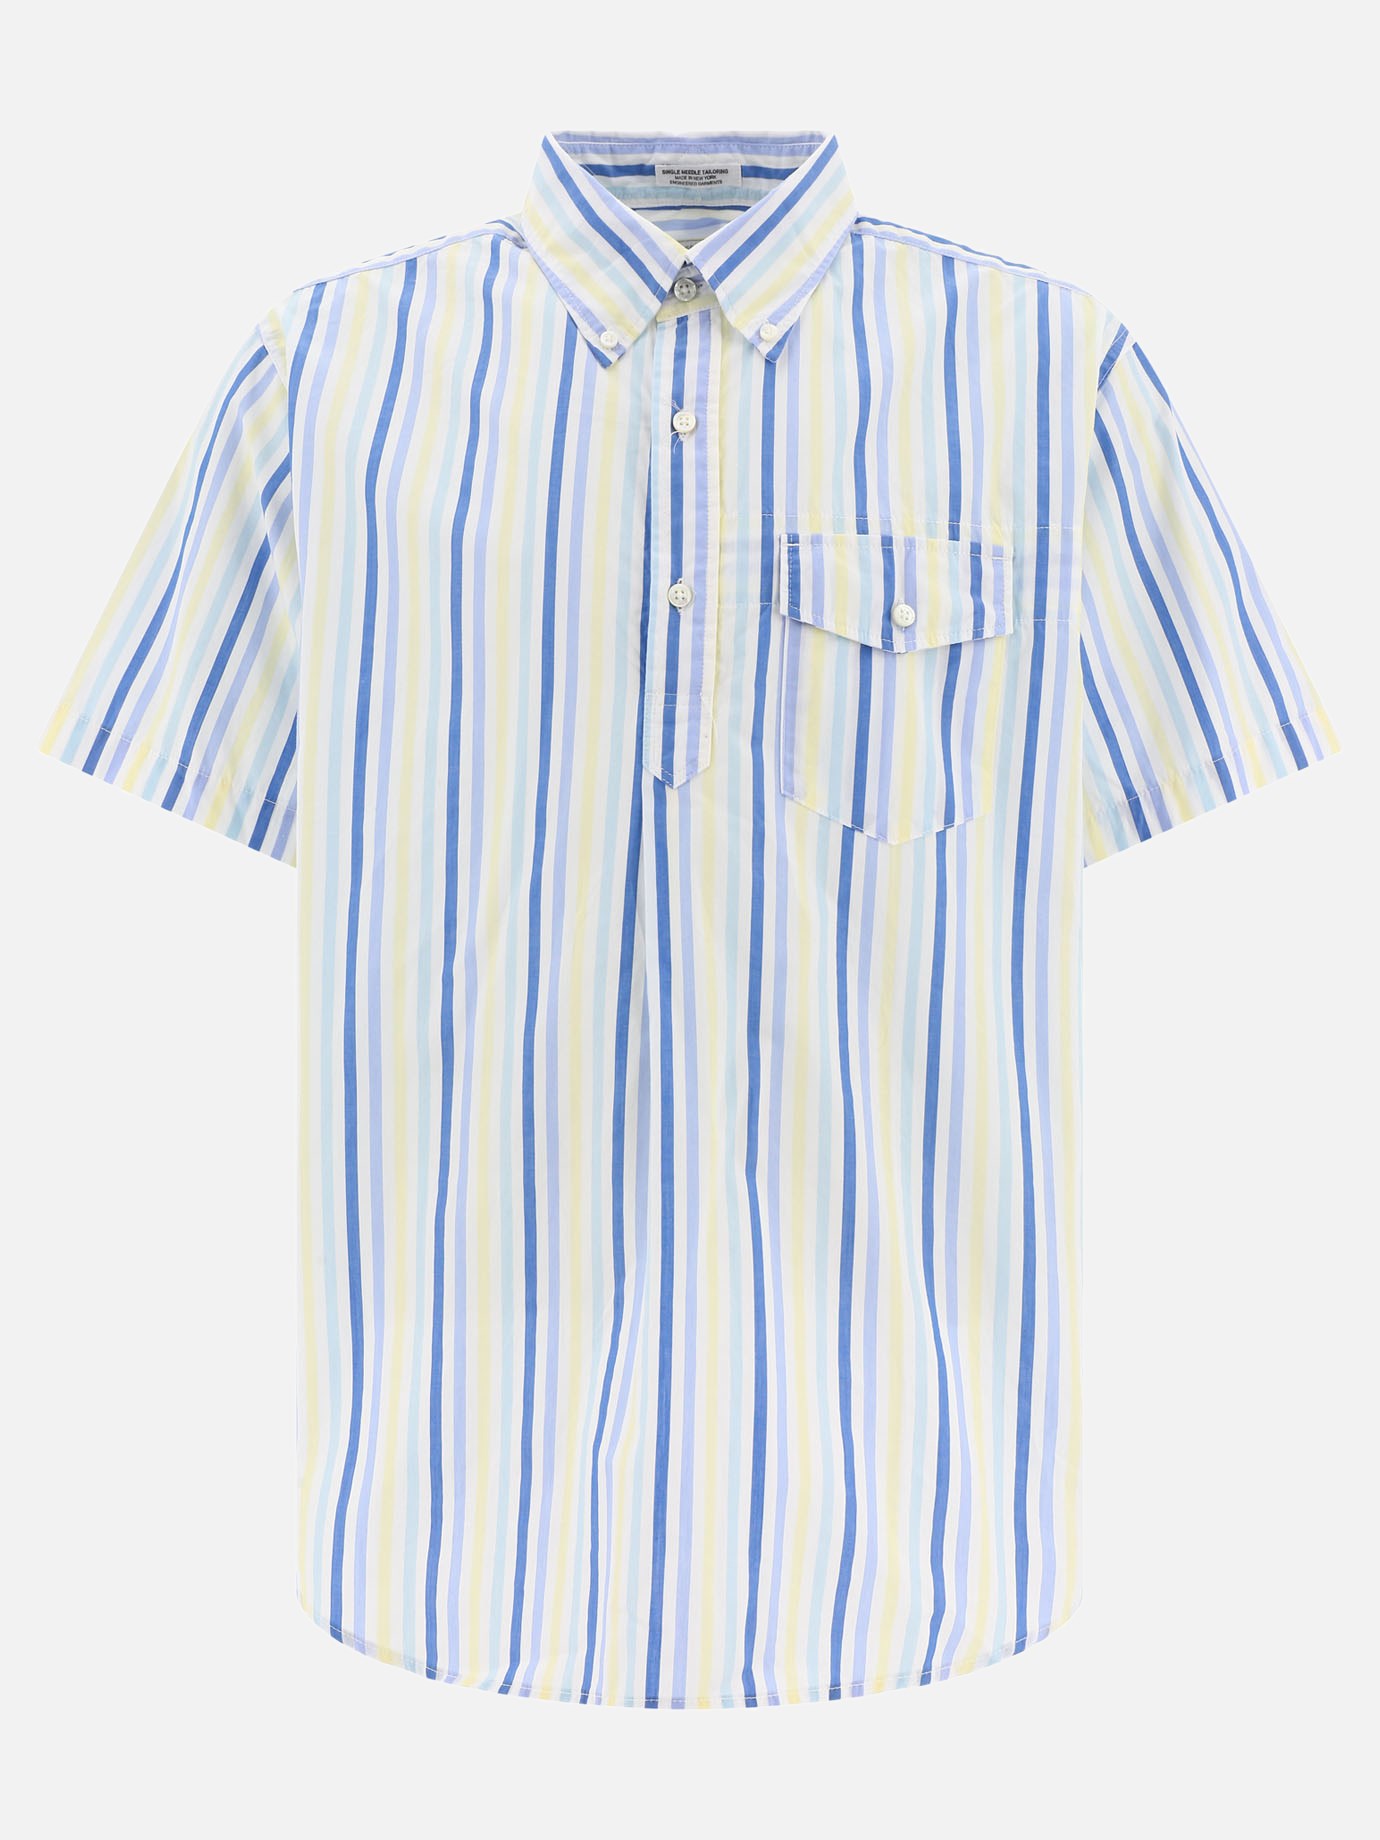  Popover  shirtby Engineered Garments - 4